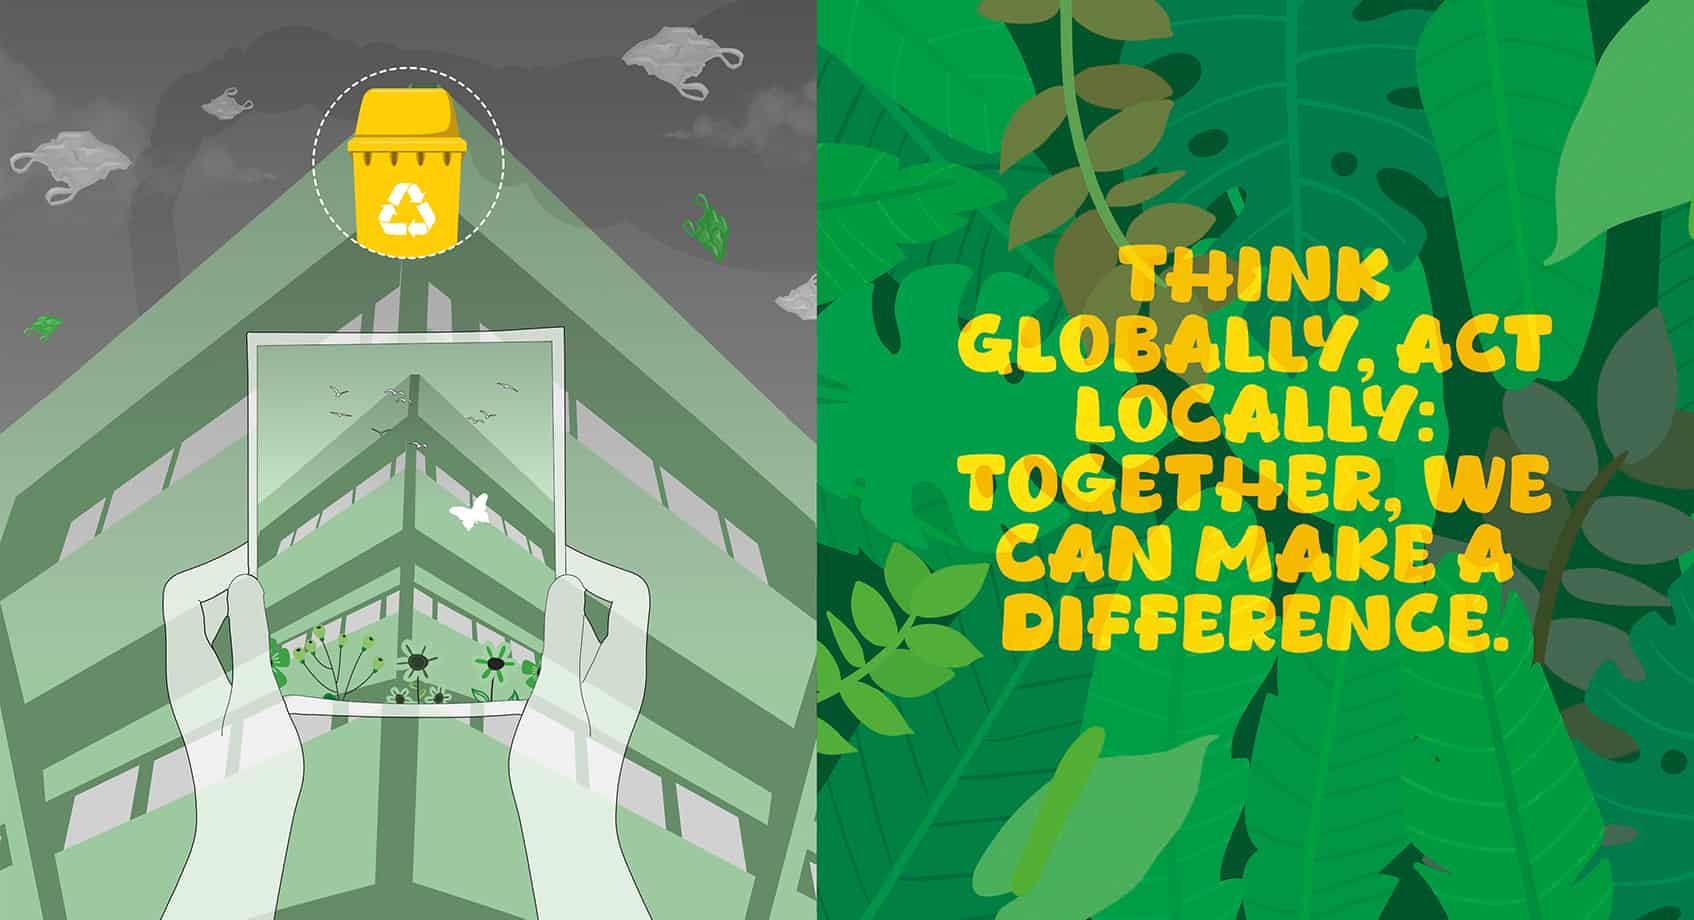 On the left side is an illustration of a pair of hands holding a frame of a building with flowers and birds, behind the photo is the same building but with a grey sky, plastic bags floating around and a yellow recycling bin. On the right side is an illustration of green leaves with text over the top reading: 'Think globally, act locally: Together we can make a difference.'